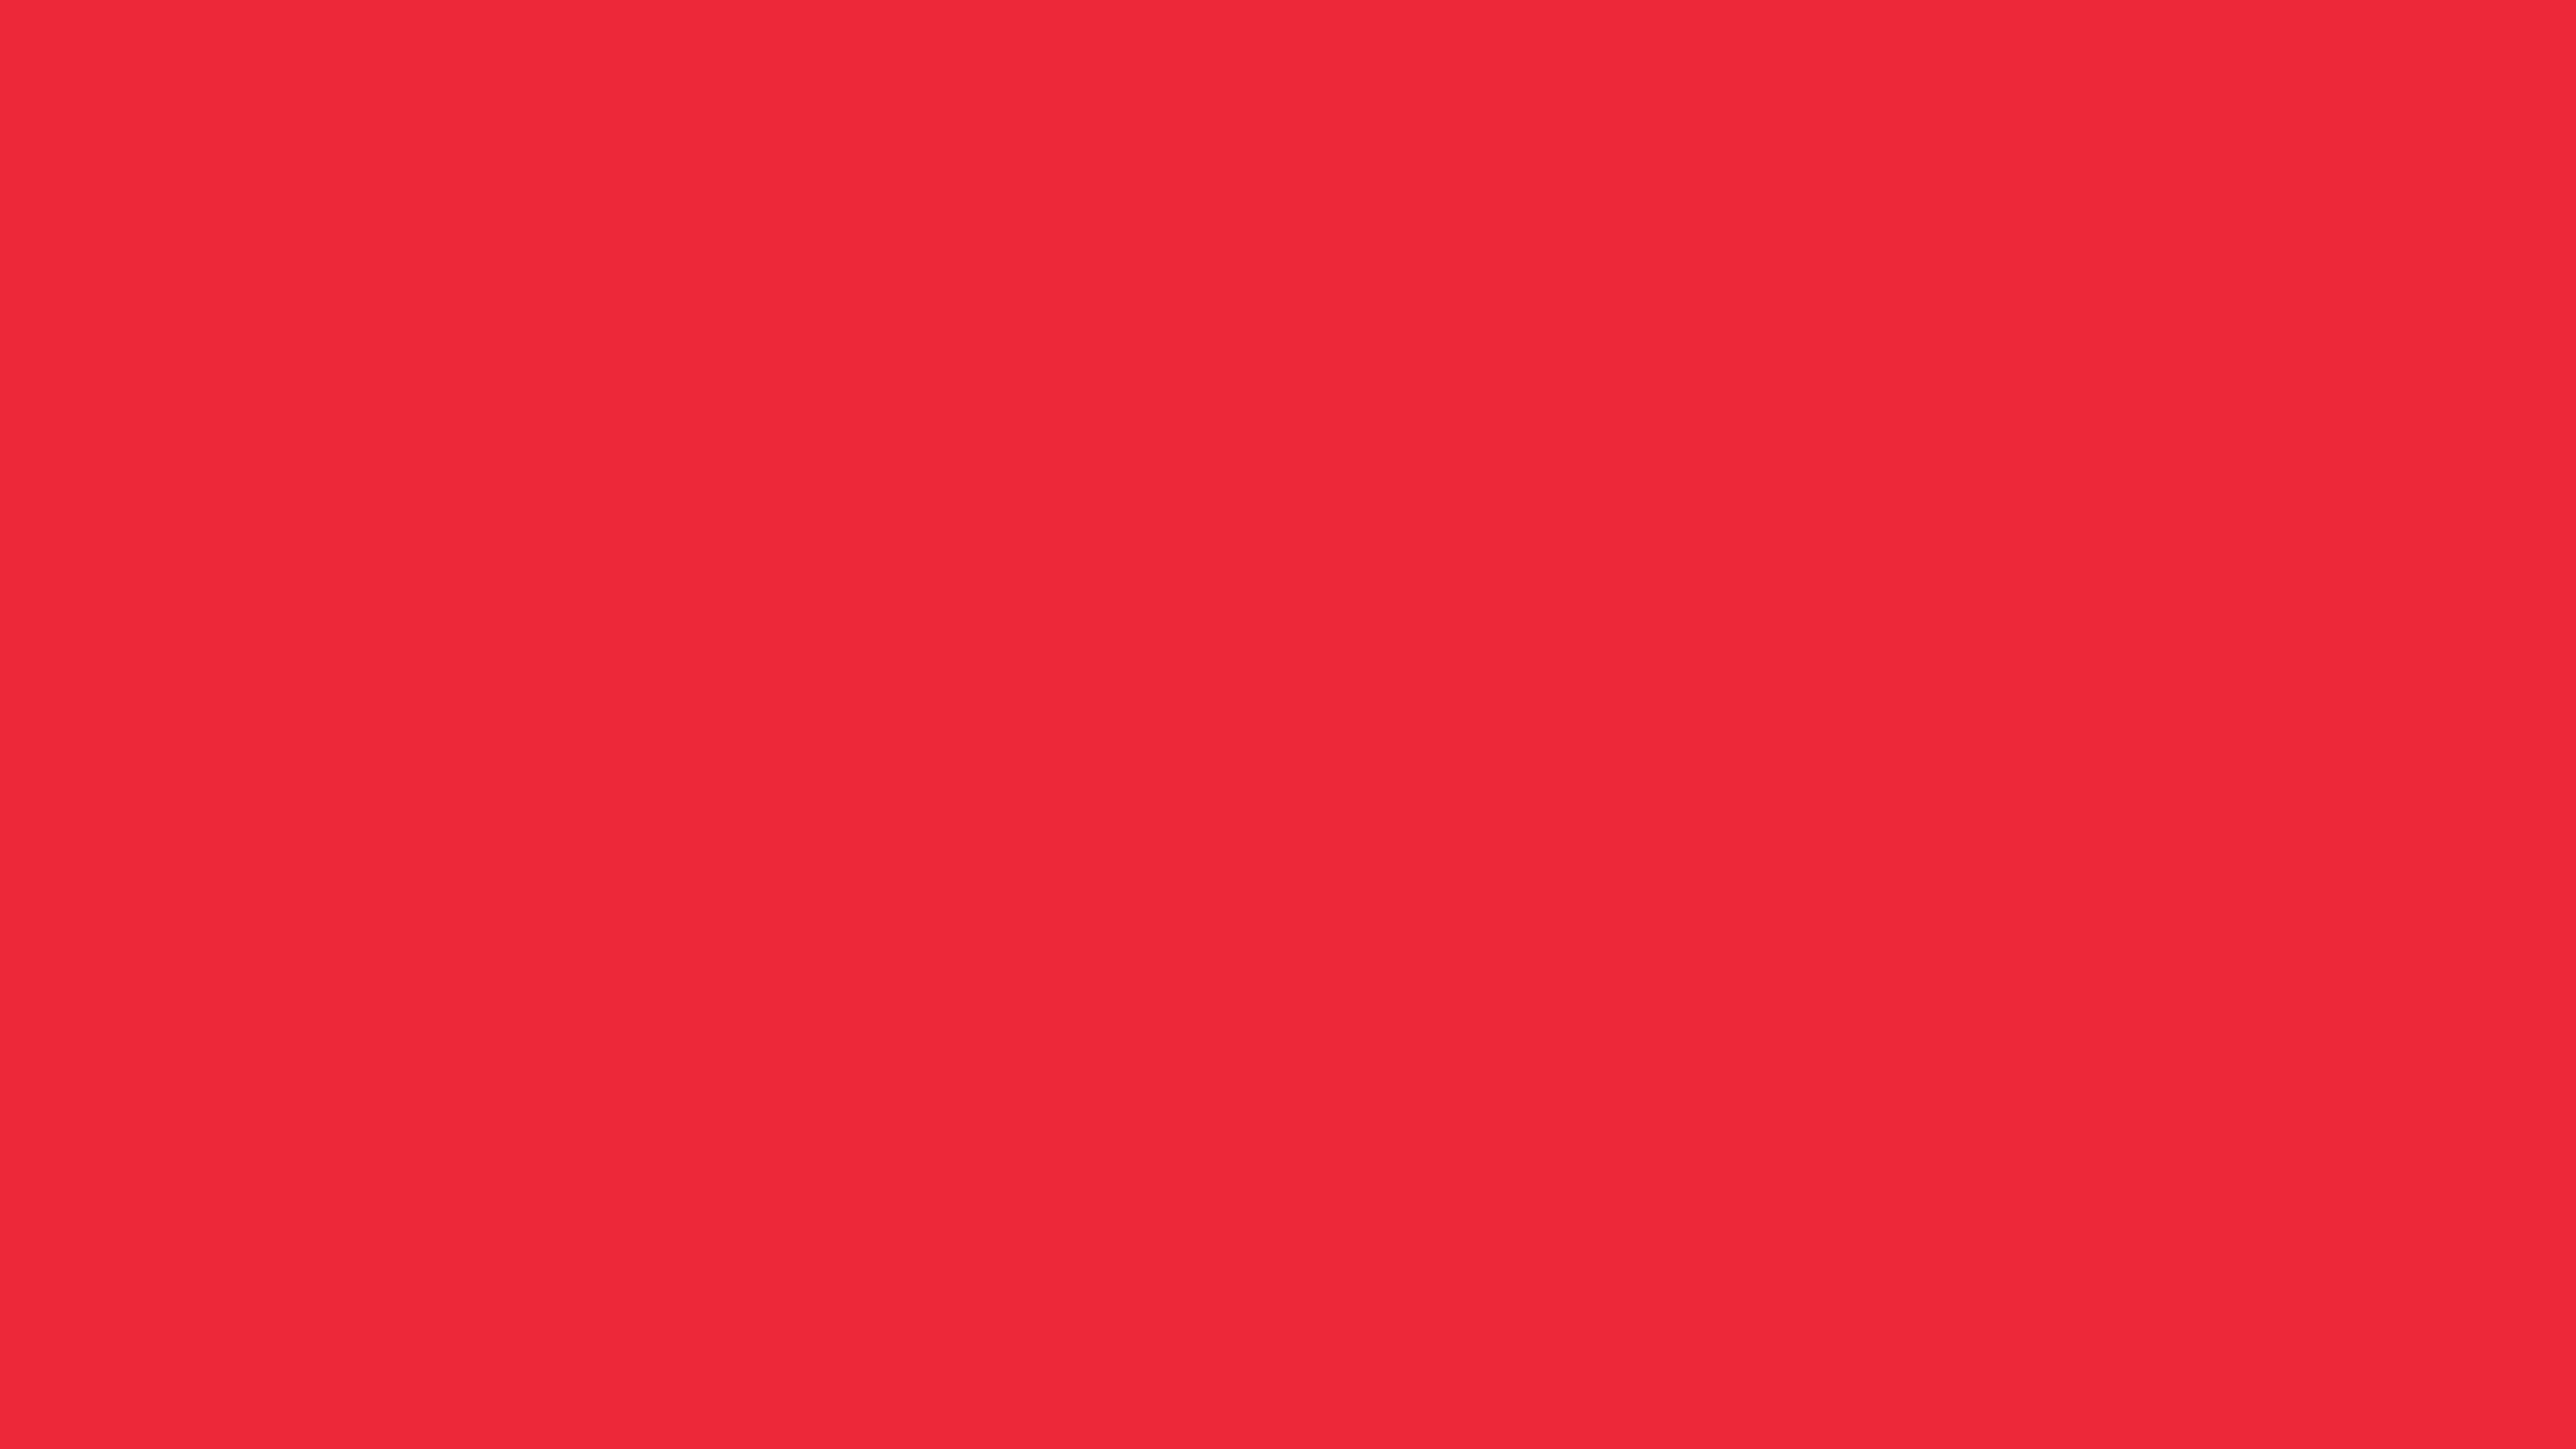 4096x2304 Imperial Red Solid Color Background